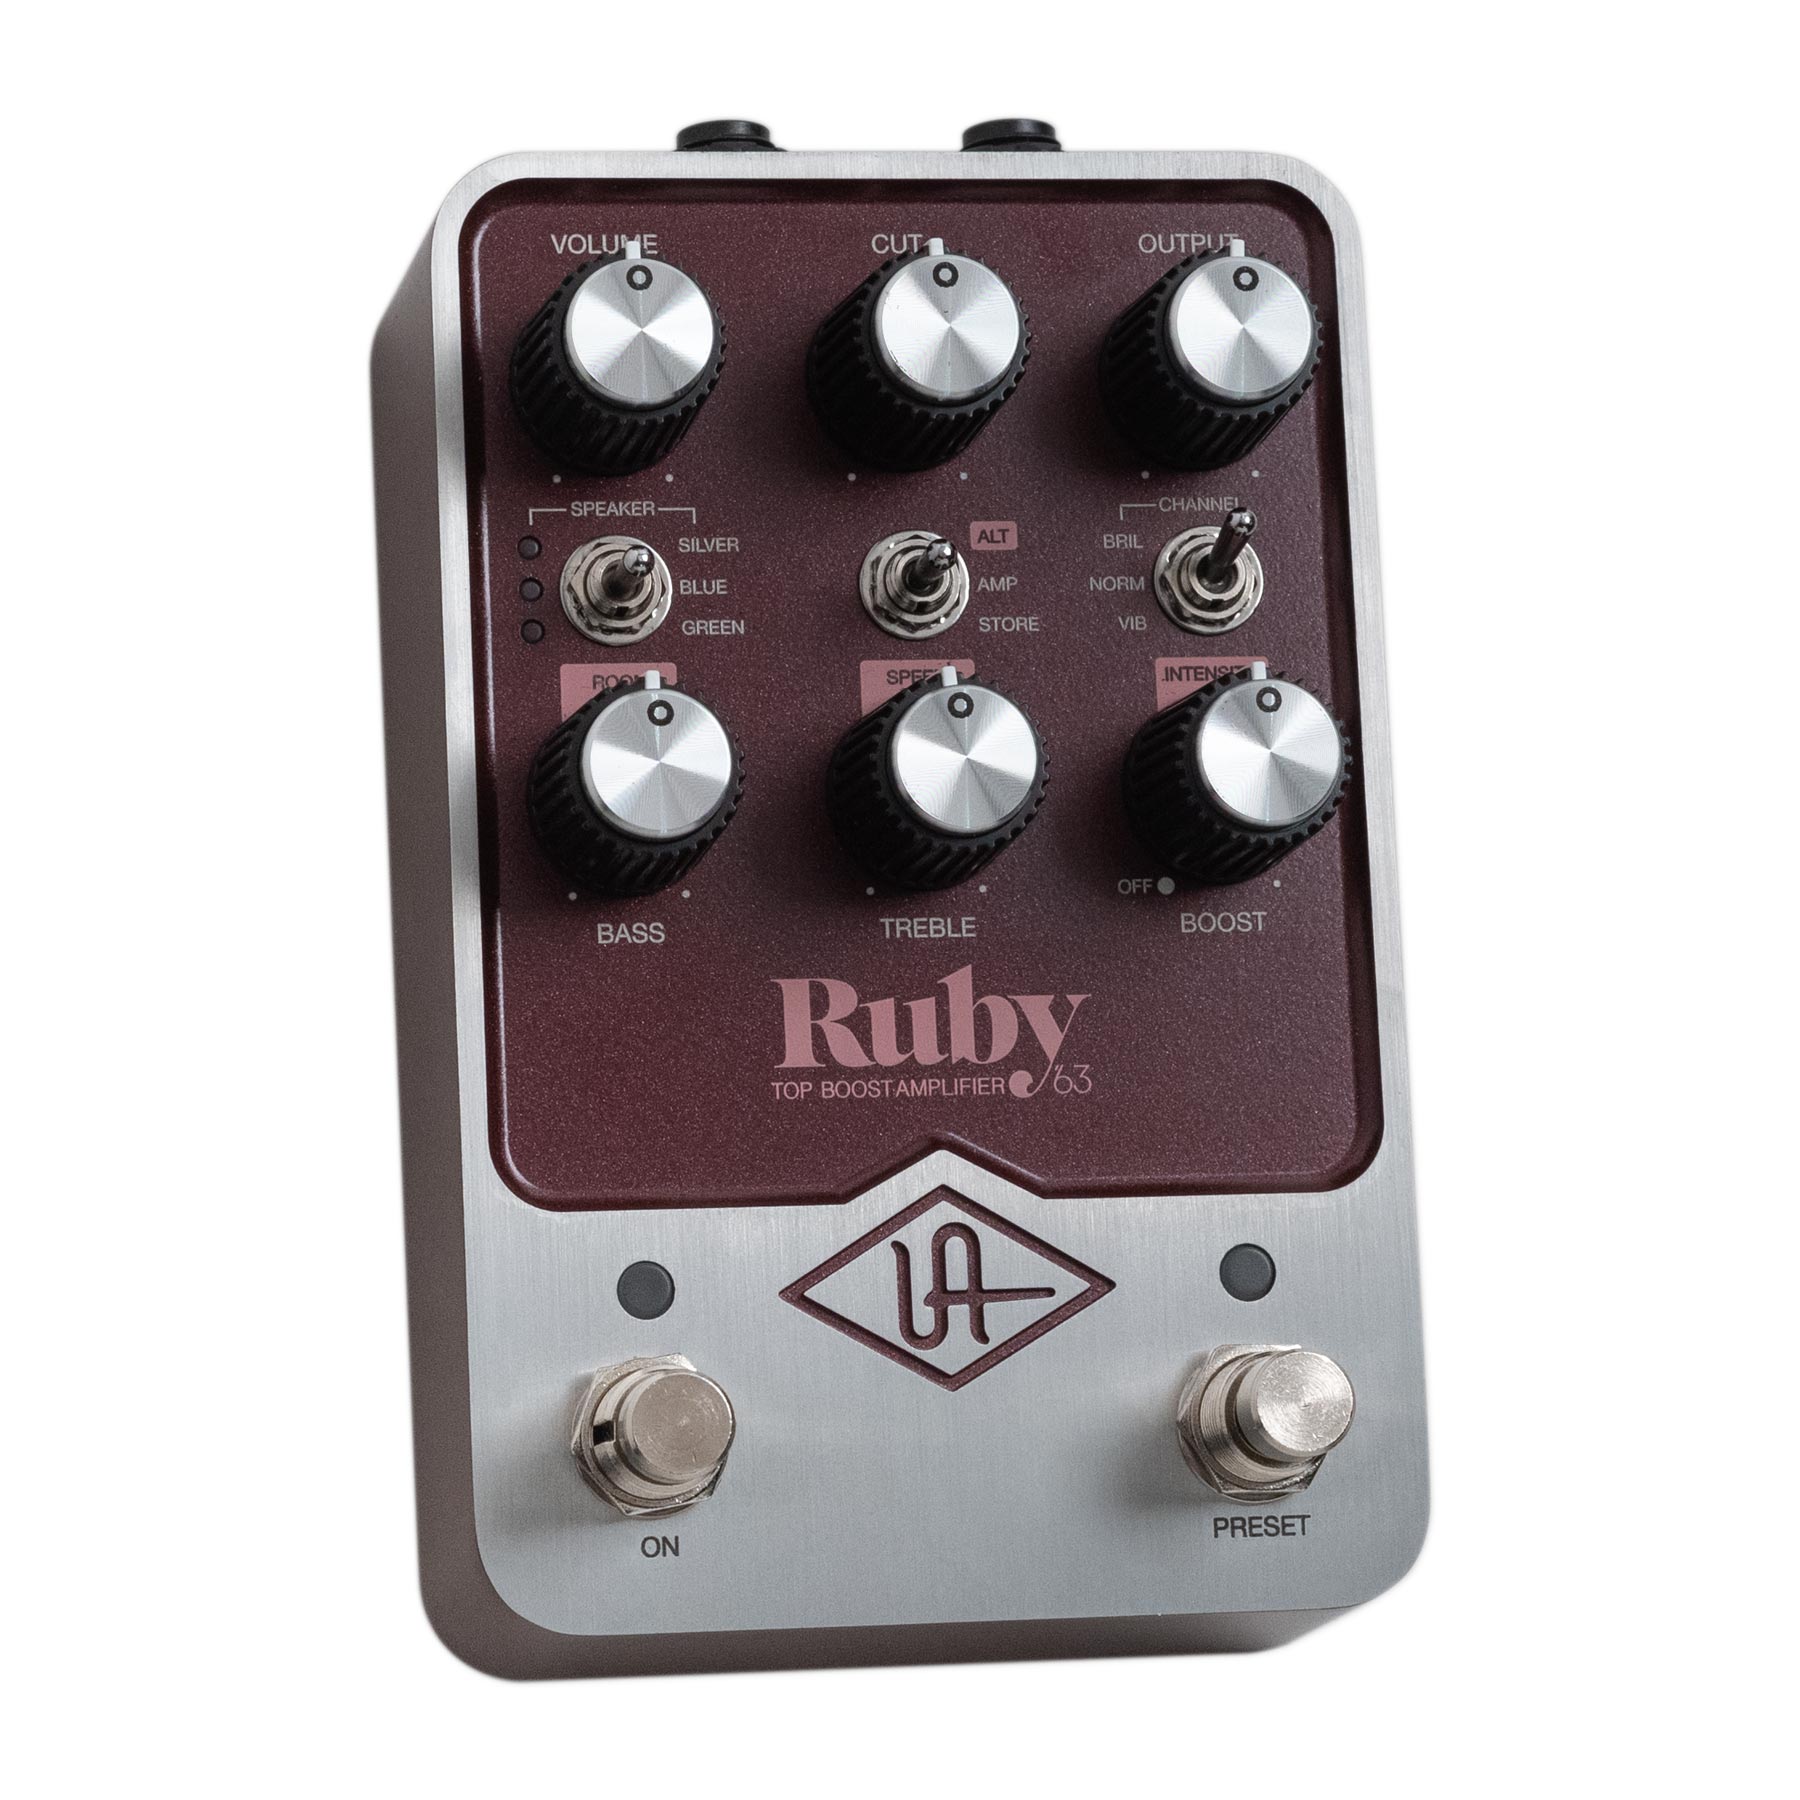 UNIVERSAL AUDIO UAFX RUBY '63 TOP BOOST AMP PEDAL